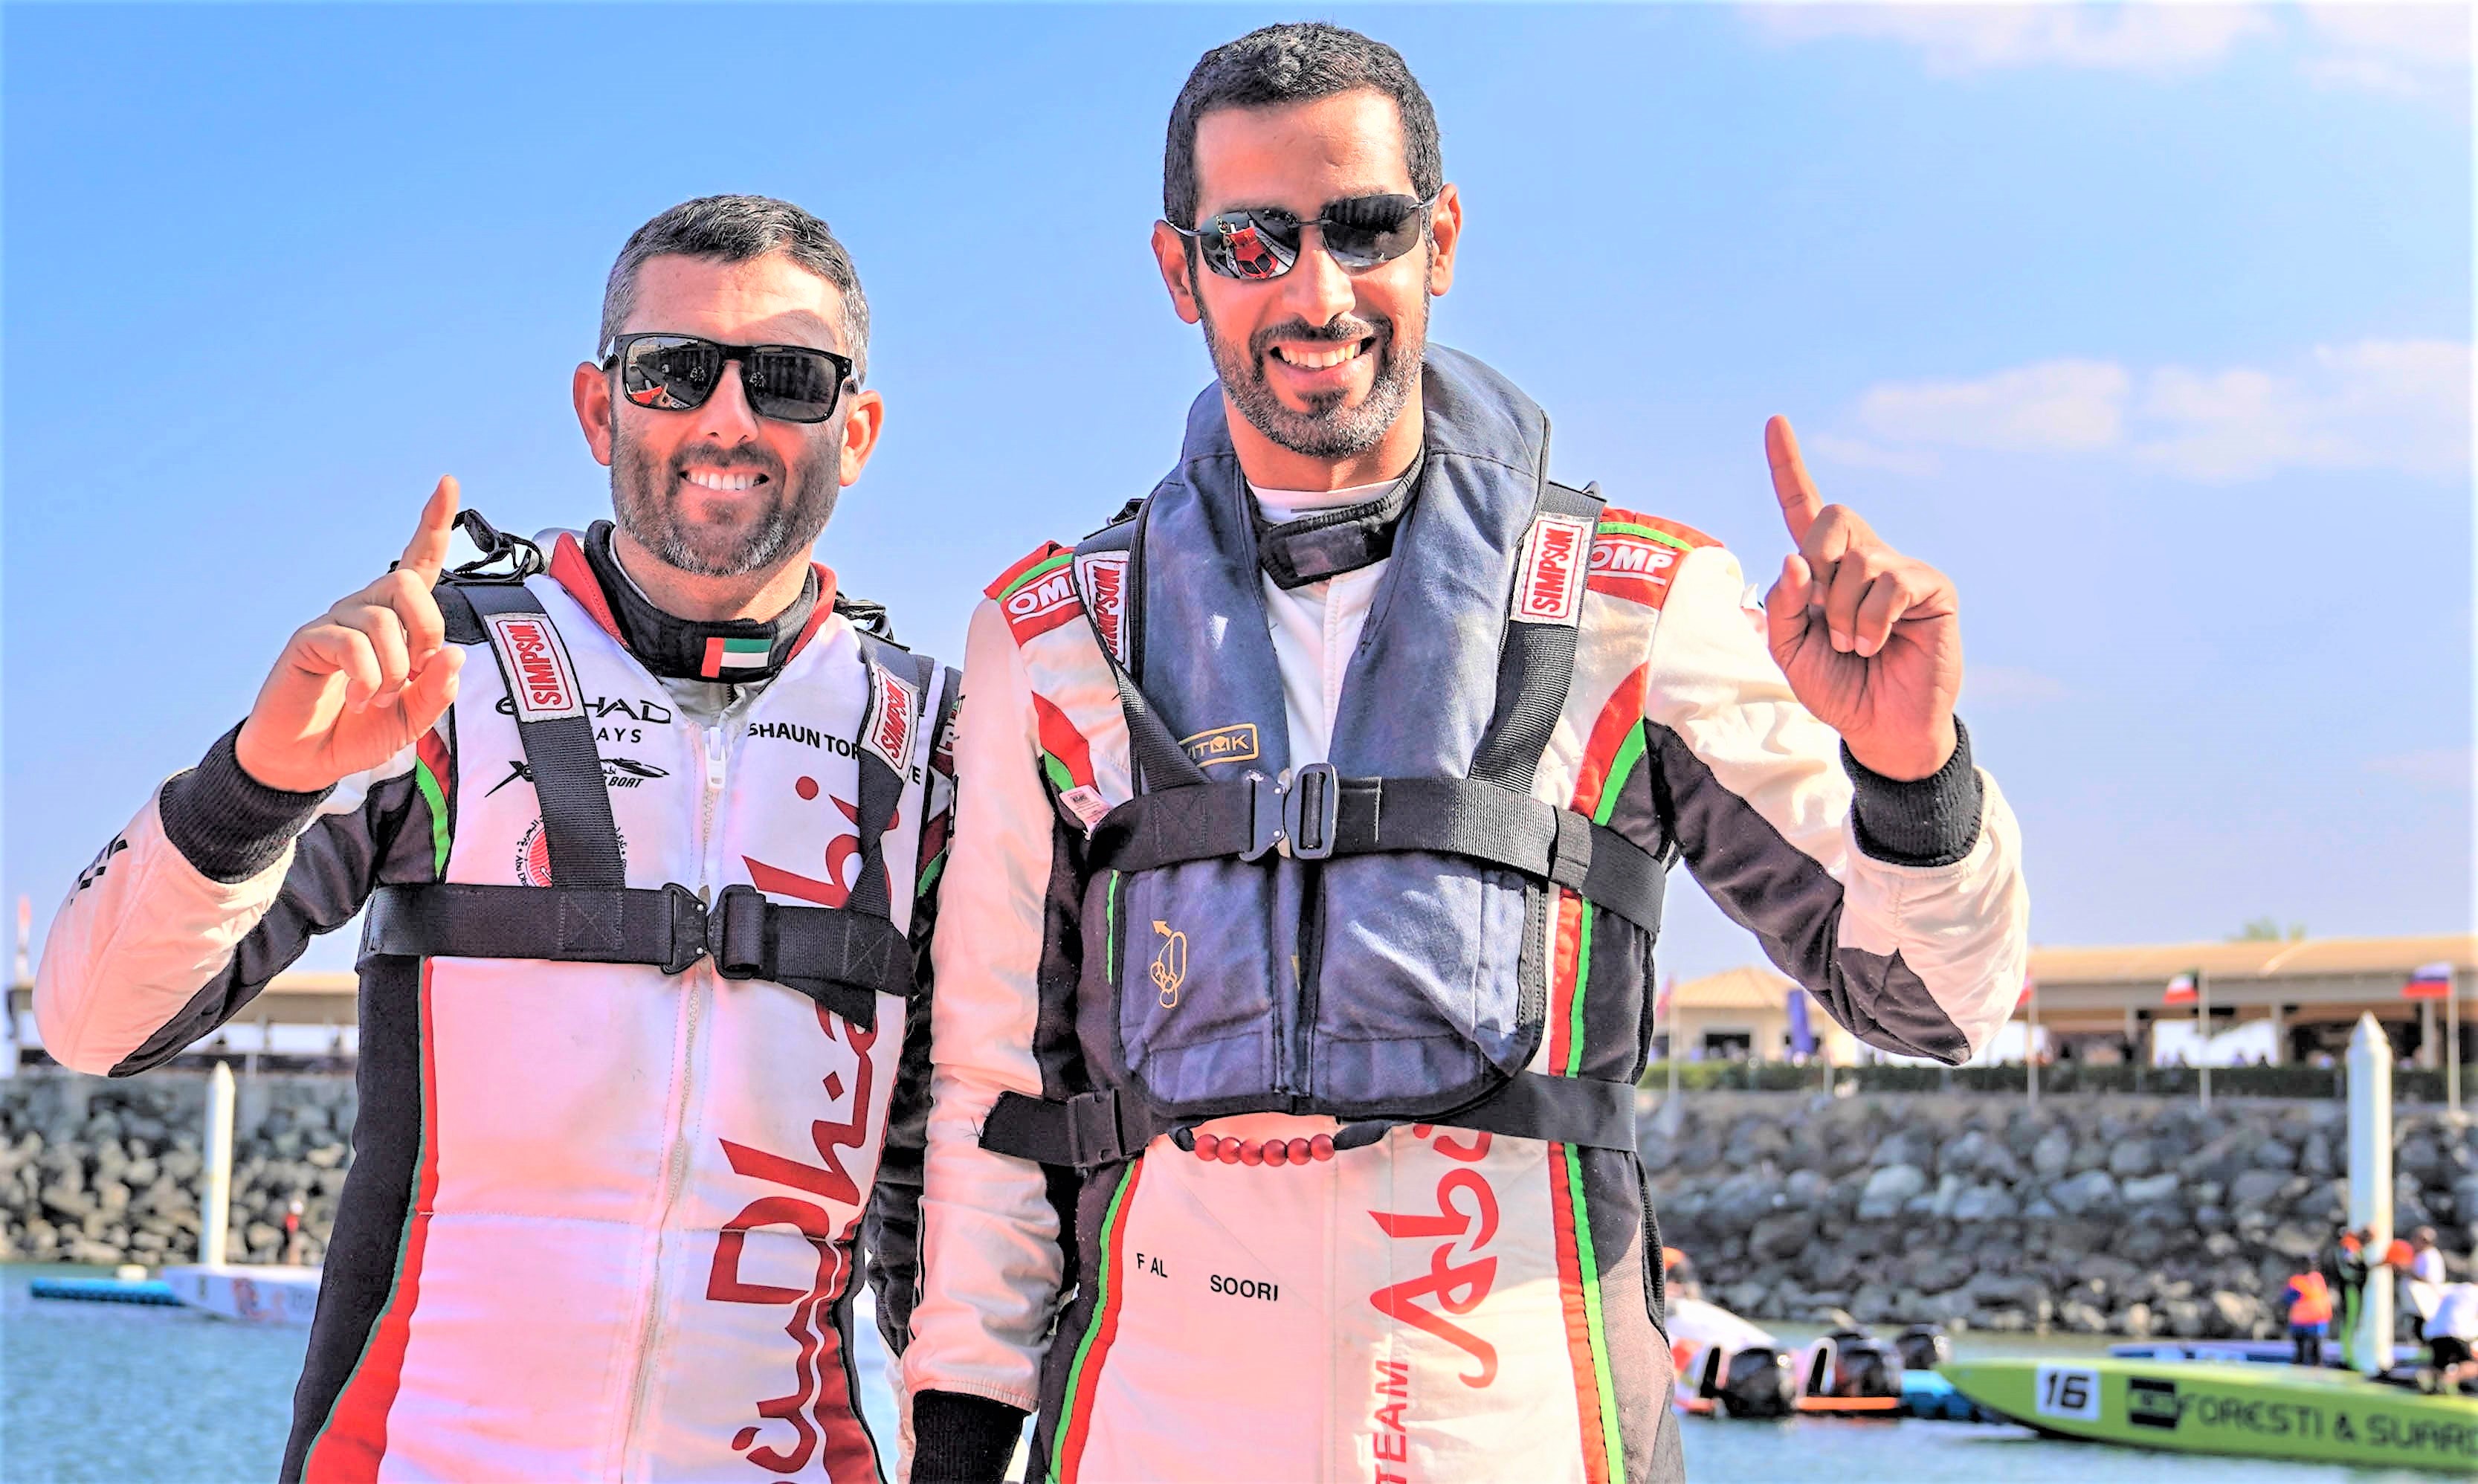 Abu Dhabi’s Class 3 Revival Sets The Pace For New Championship To Thrive